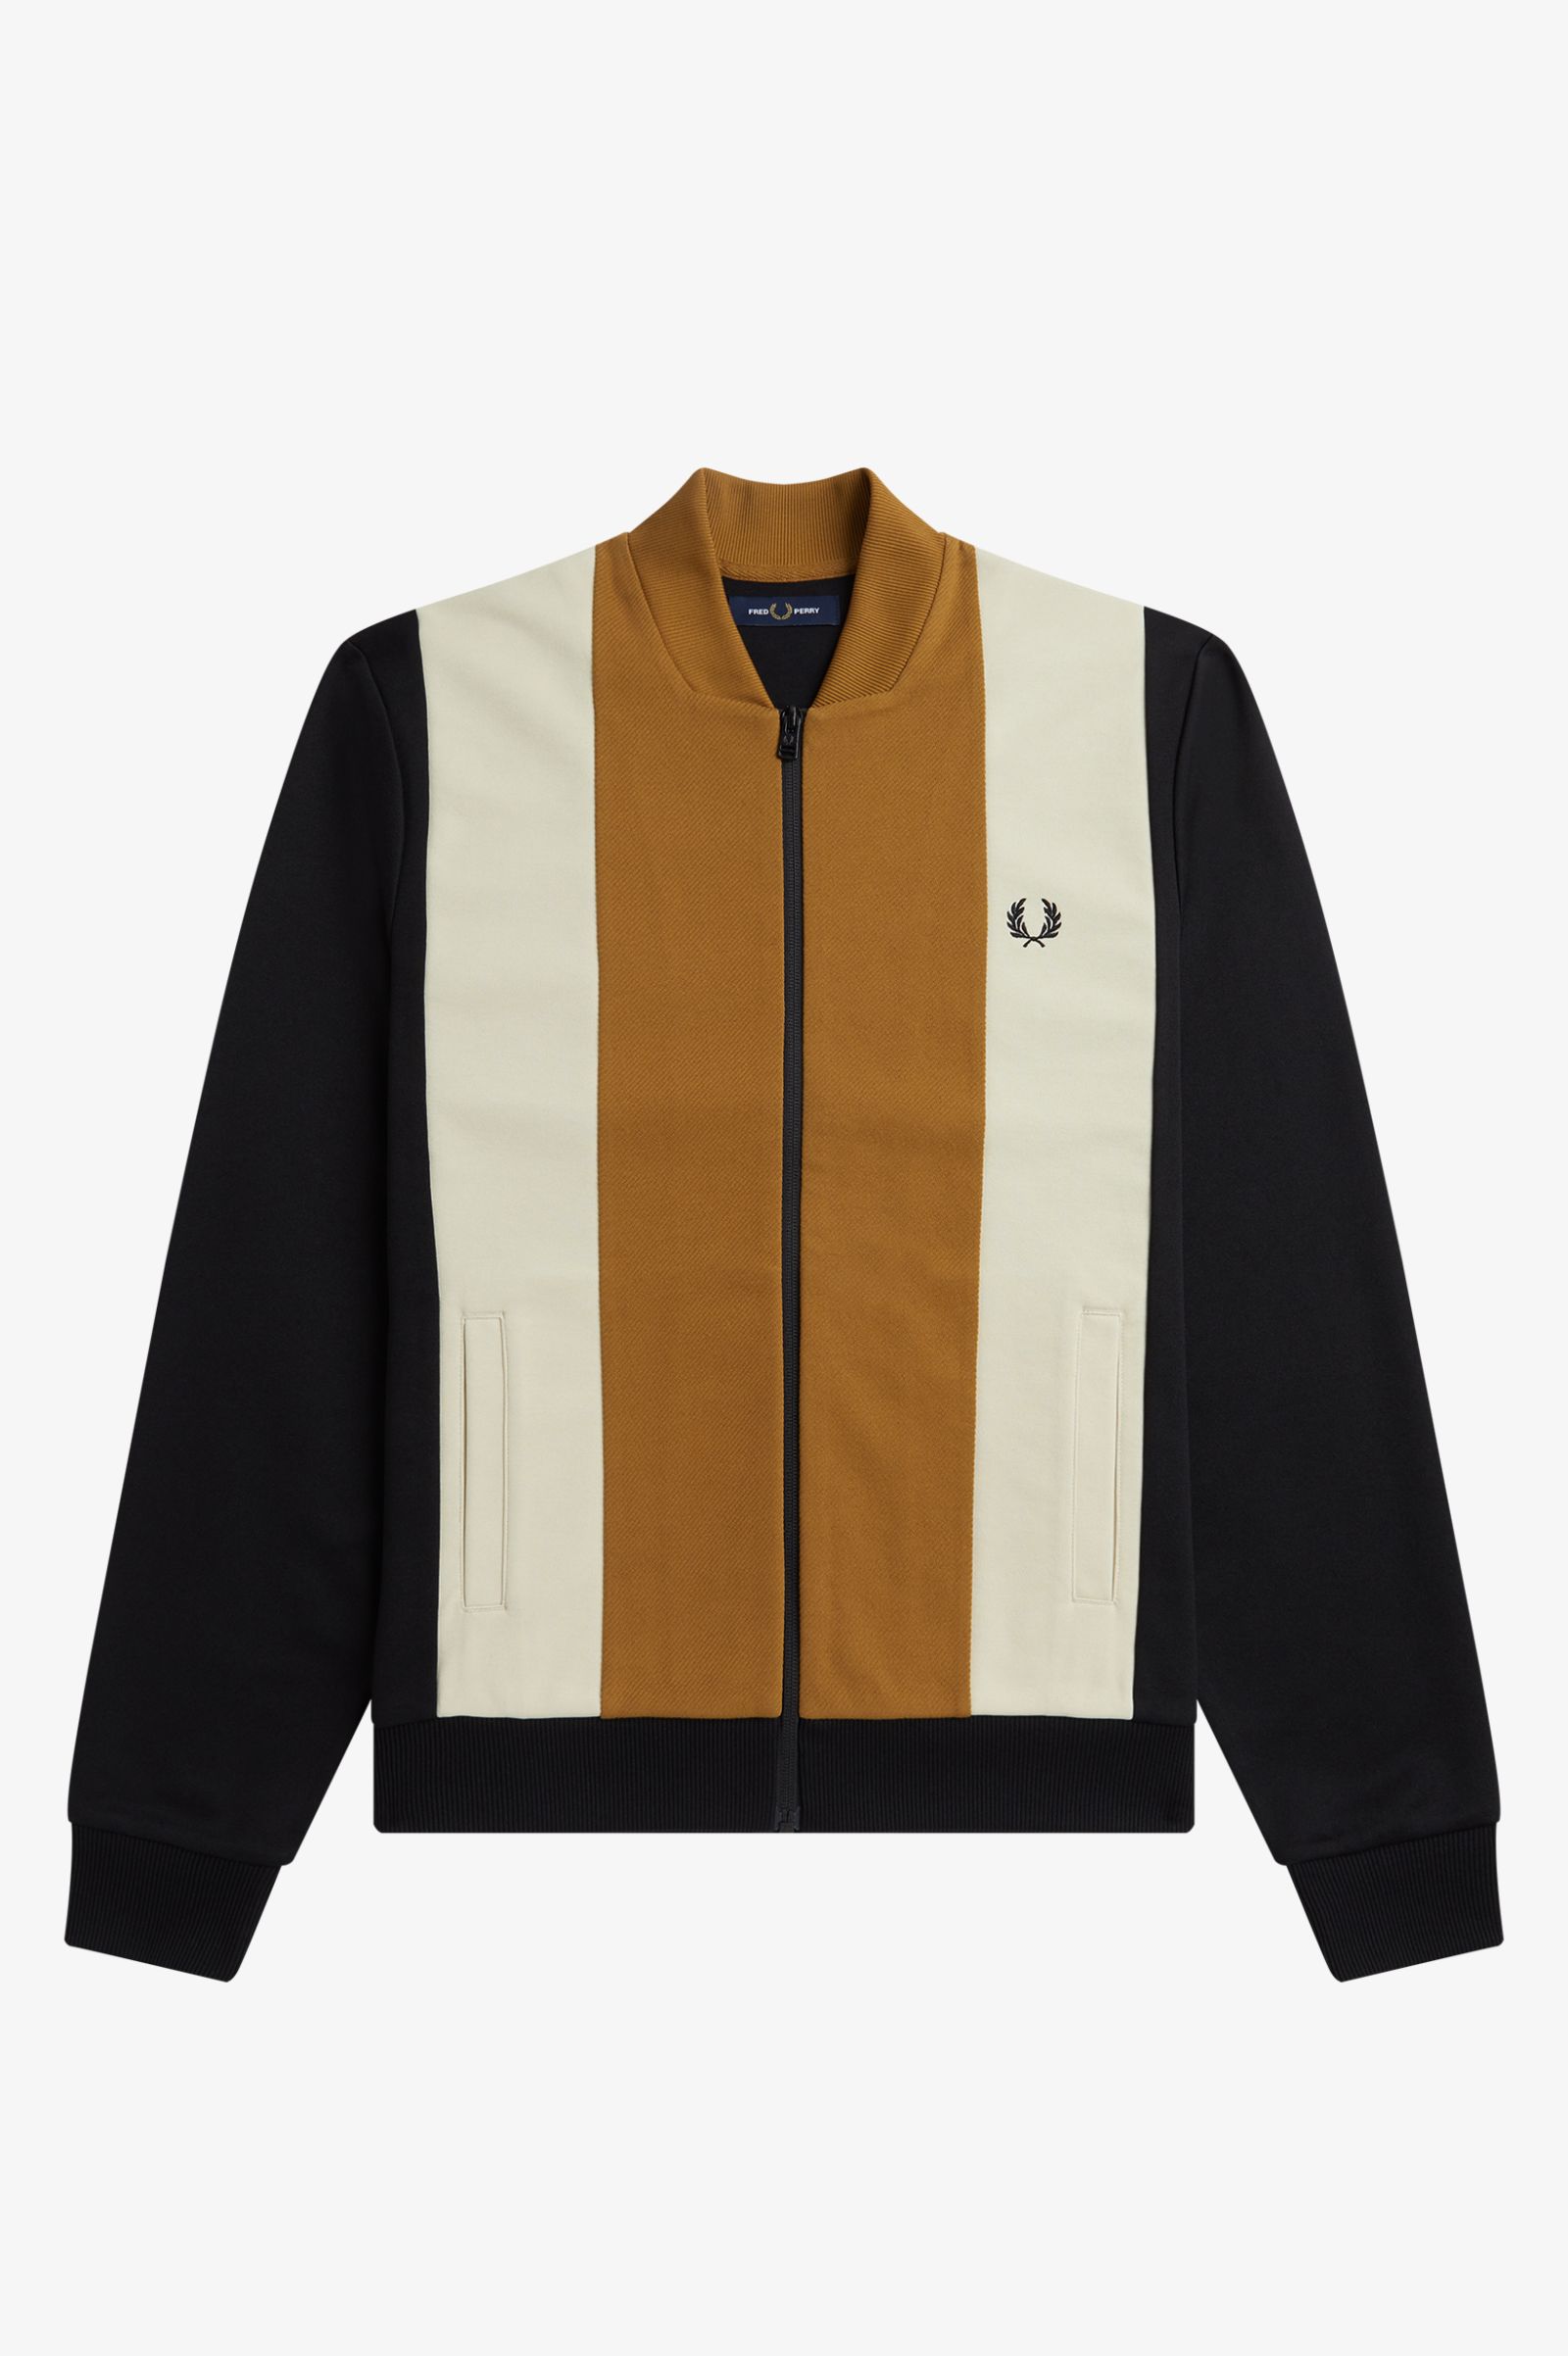 Fred Perry Colour Block Track Jacket in Black/Oatmeal/Dark Caramel 